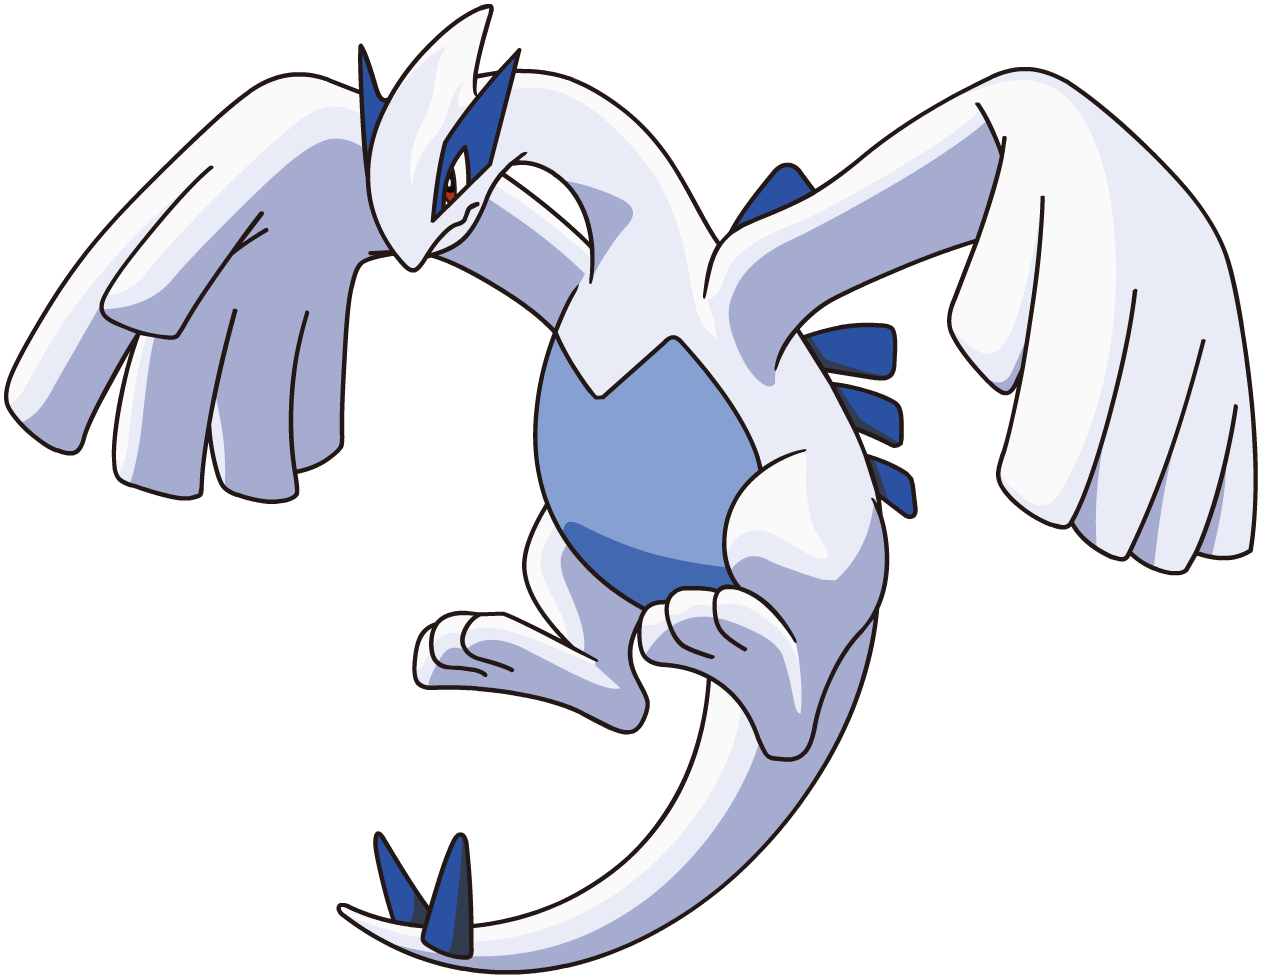 http://images3.wikia.nocookie.net/__cb20120603213739/sonicpokemon/images/a/a7/Lugia.png